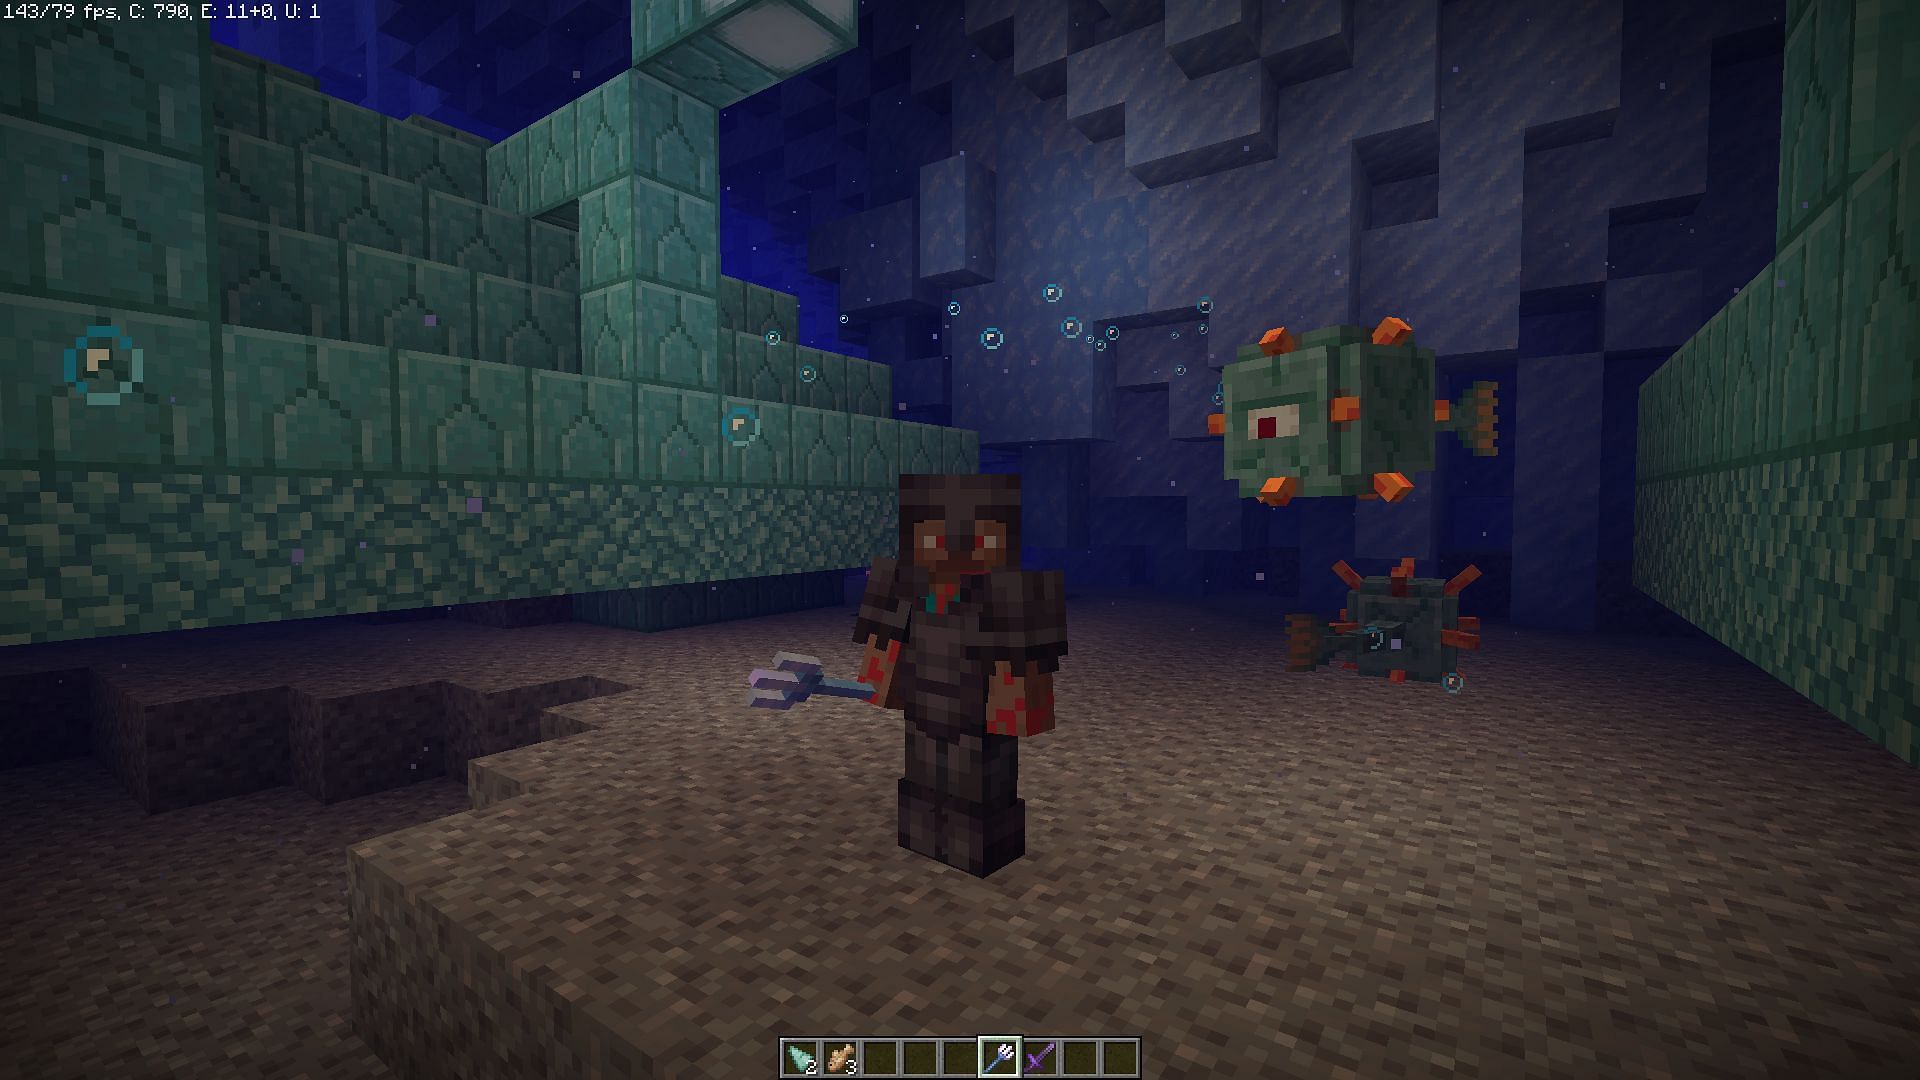 Guardians spawn all around and inside the Ocean Monument in Minecraft (Image via Mojang)